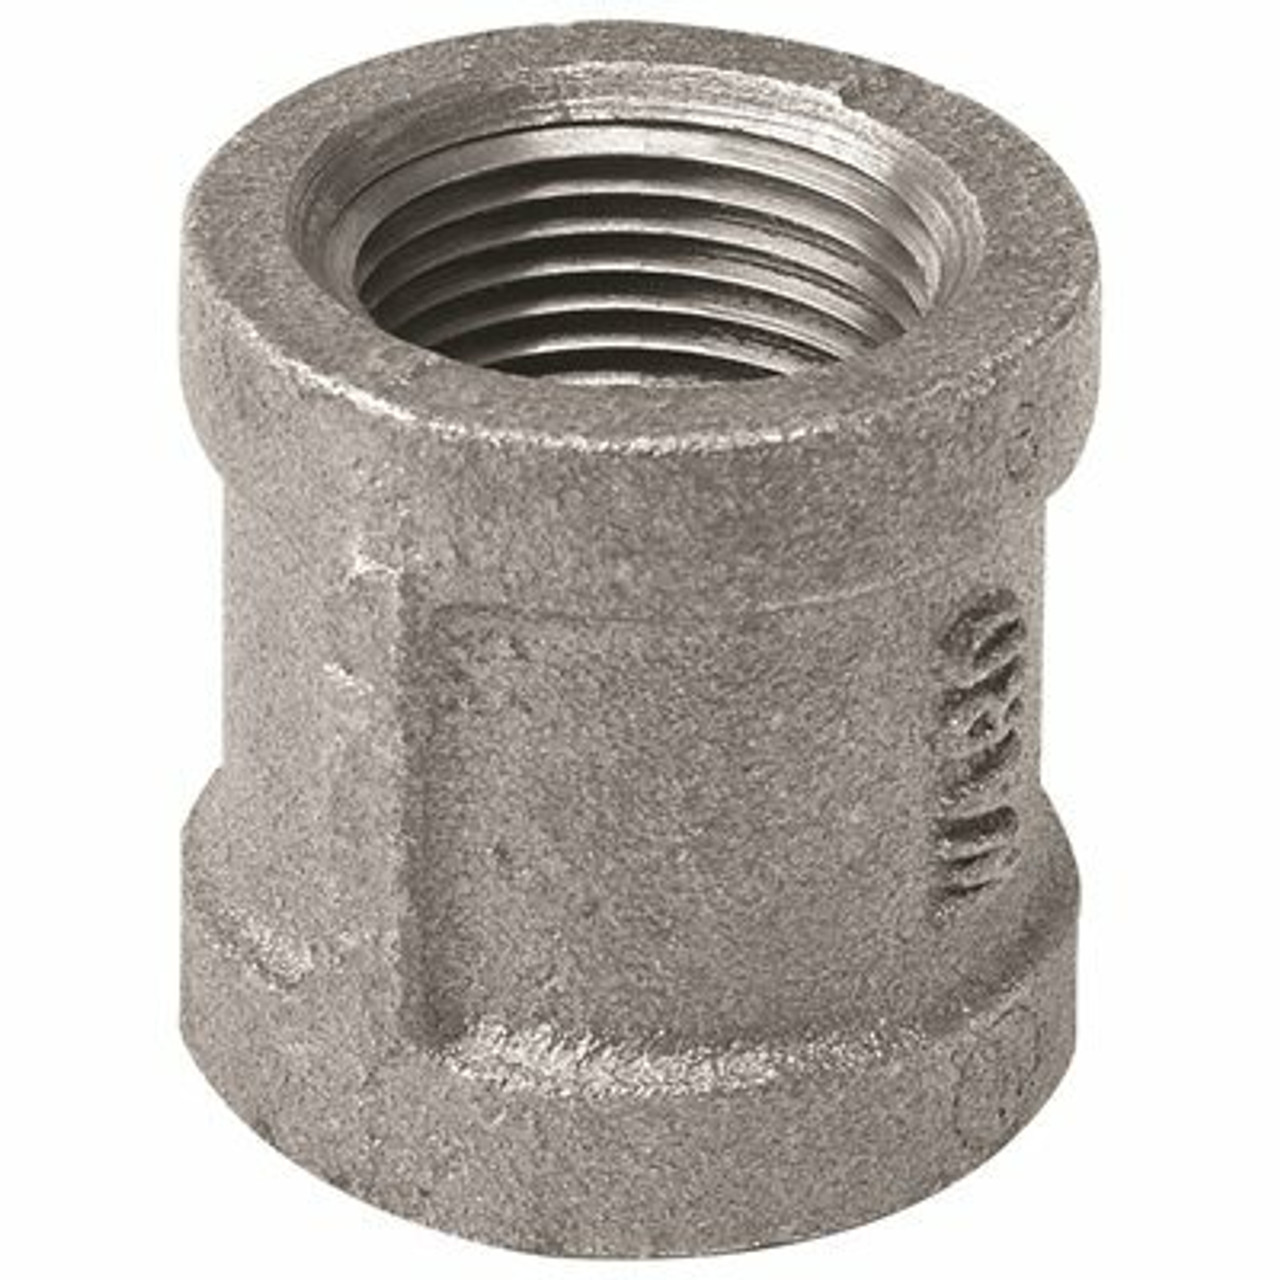 Ward Mfg. Ward Manufacturing Malleable Reducing Coupling, Black, 1X1/2 In.